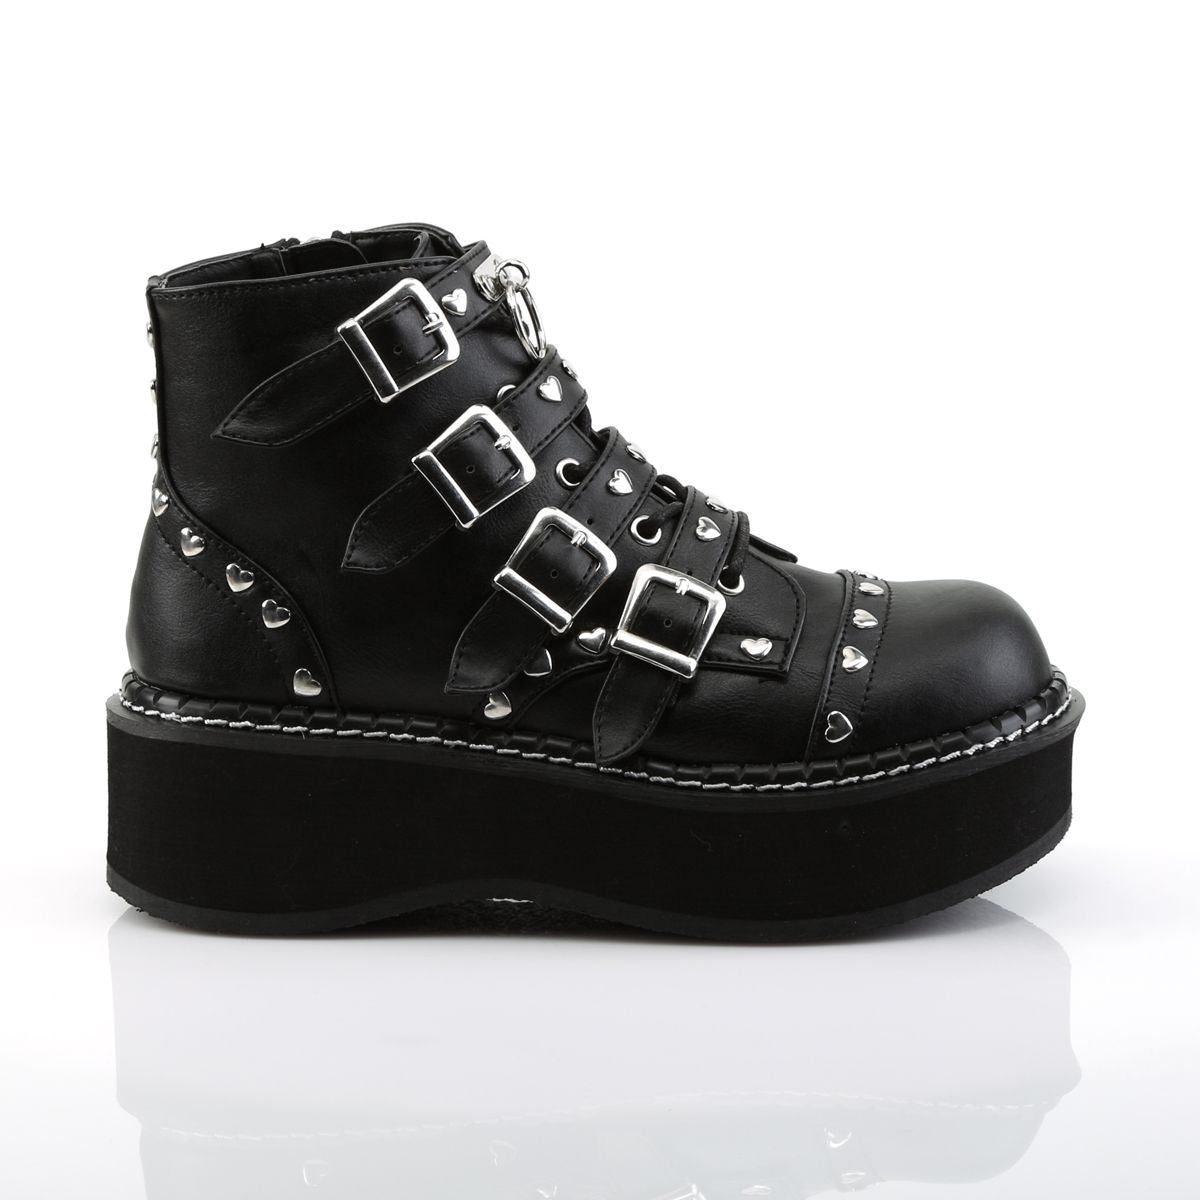 Demonia Emily 315 Black Studded Ankle Boots